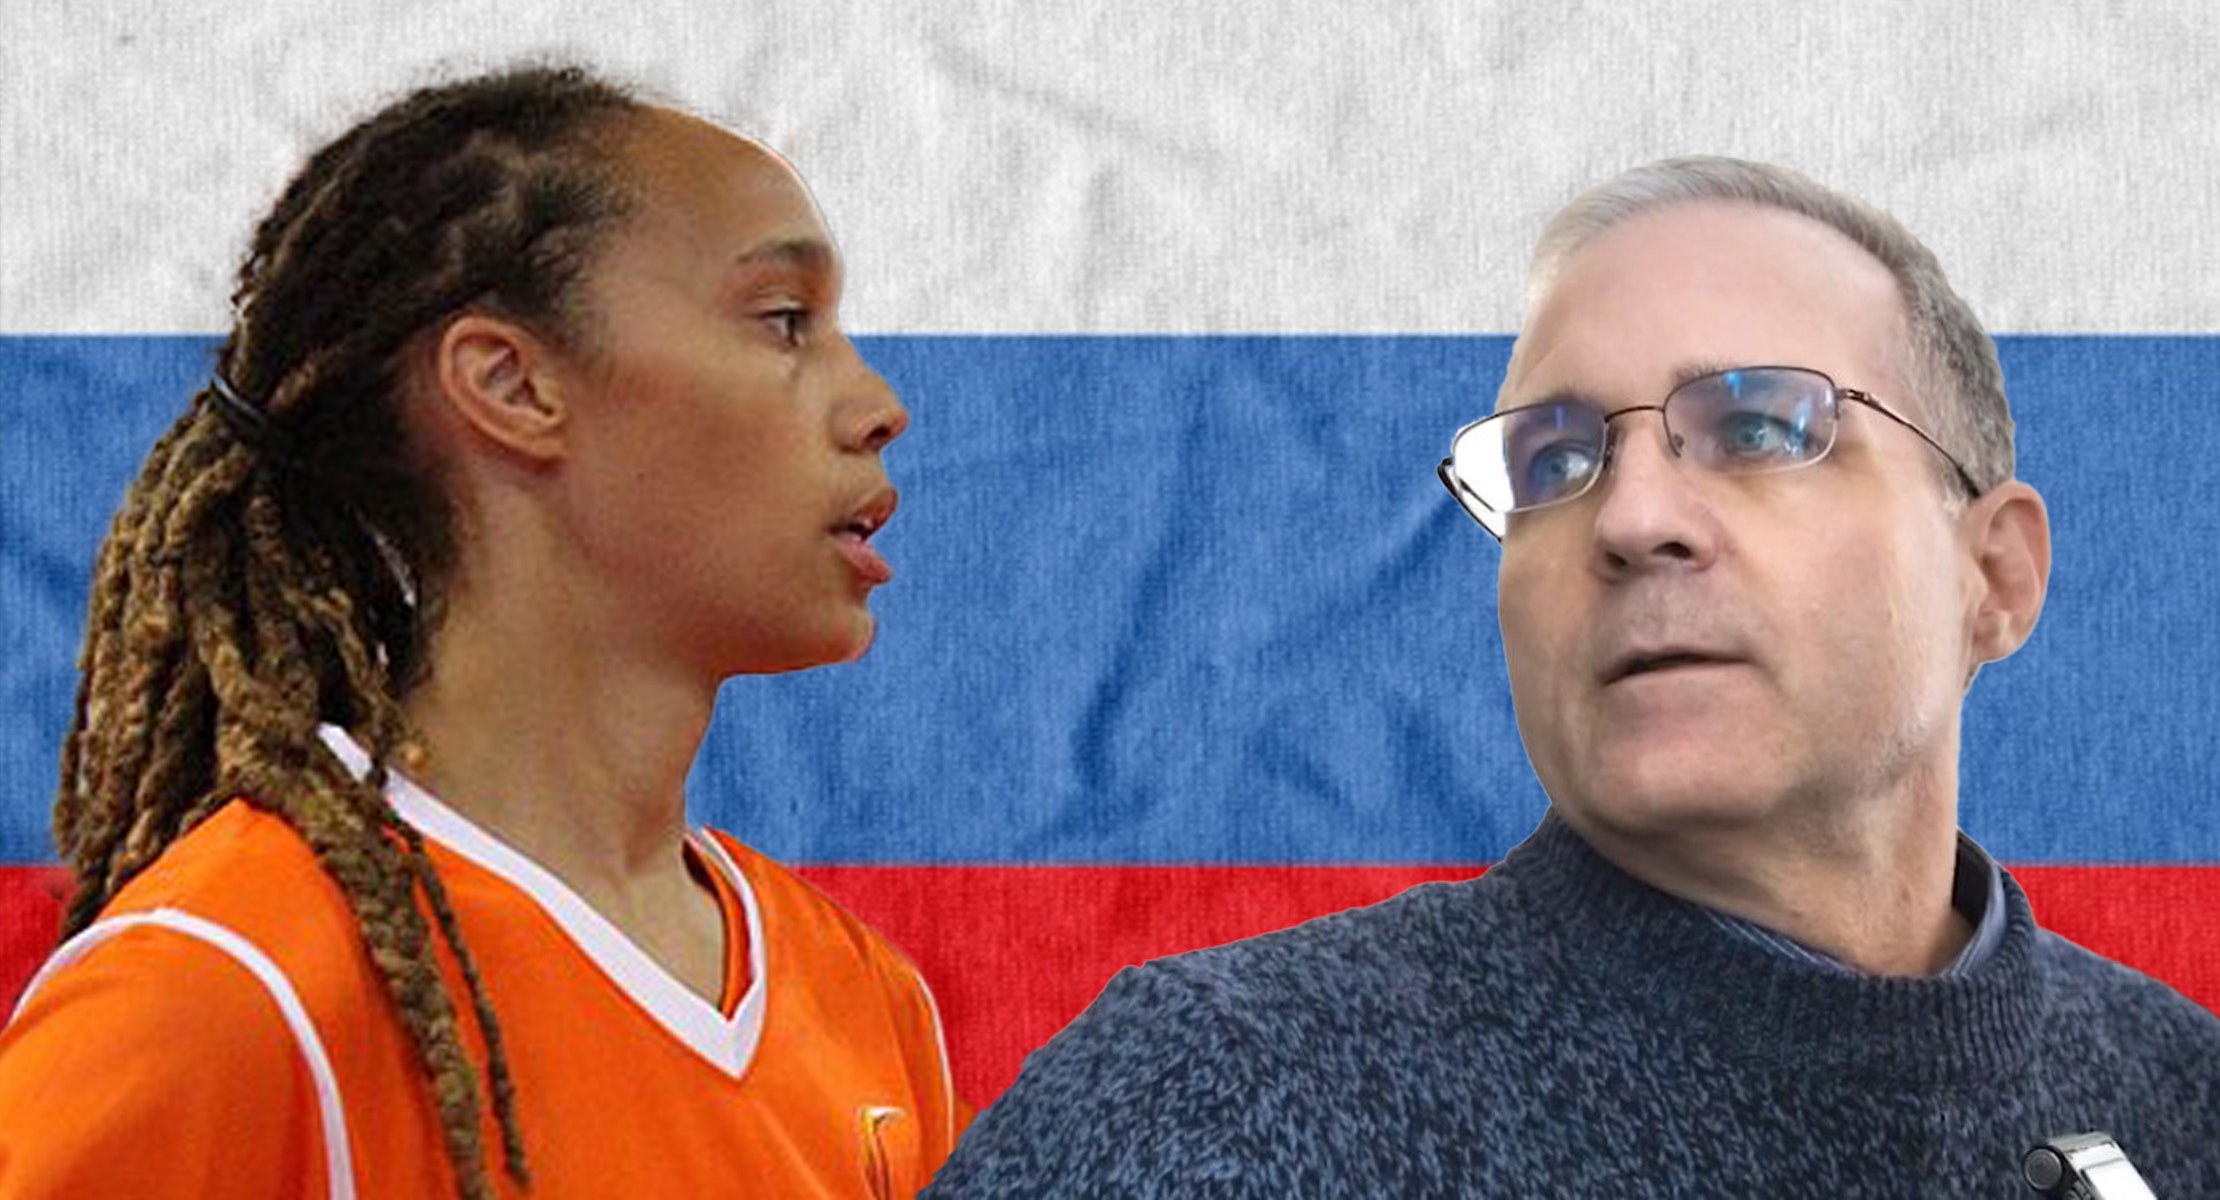 BREAKING: Russia Confirms For First Time That Prisoner Swap Talks Are Underway For Brittney Griner And Paul Whelan